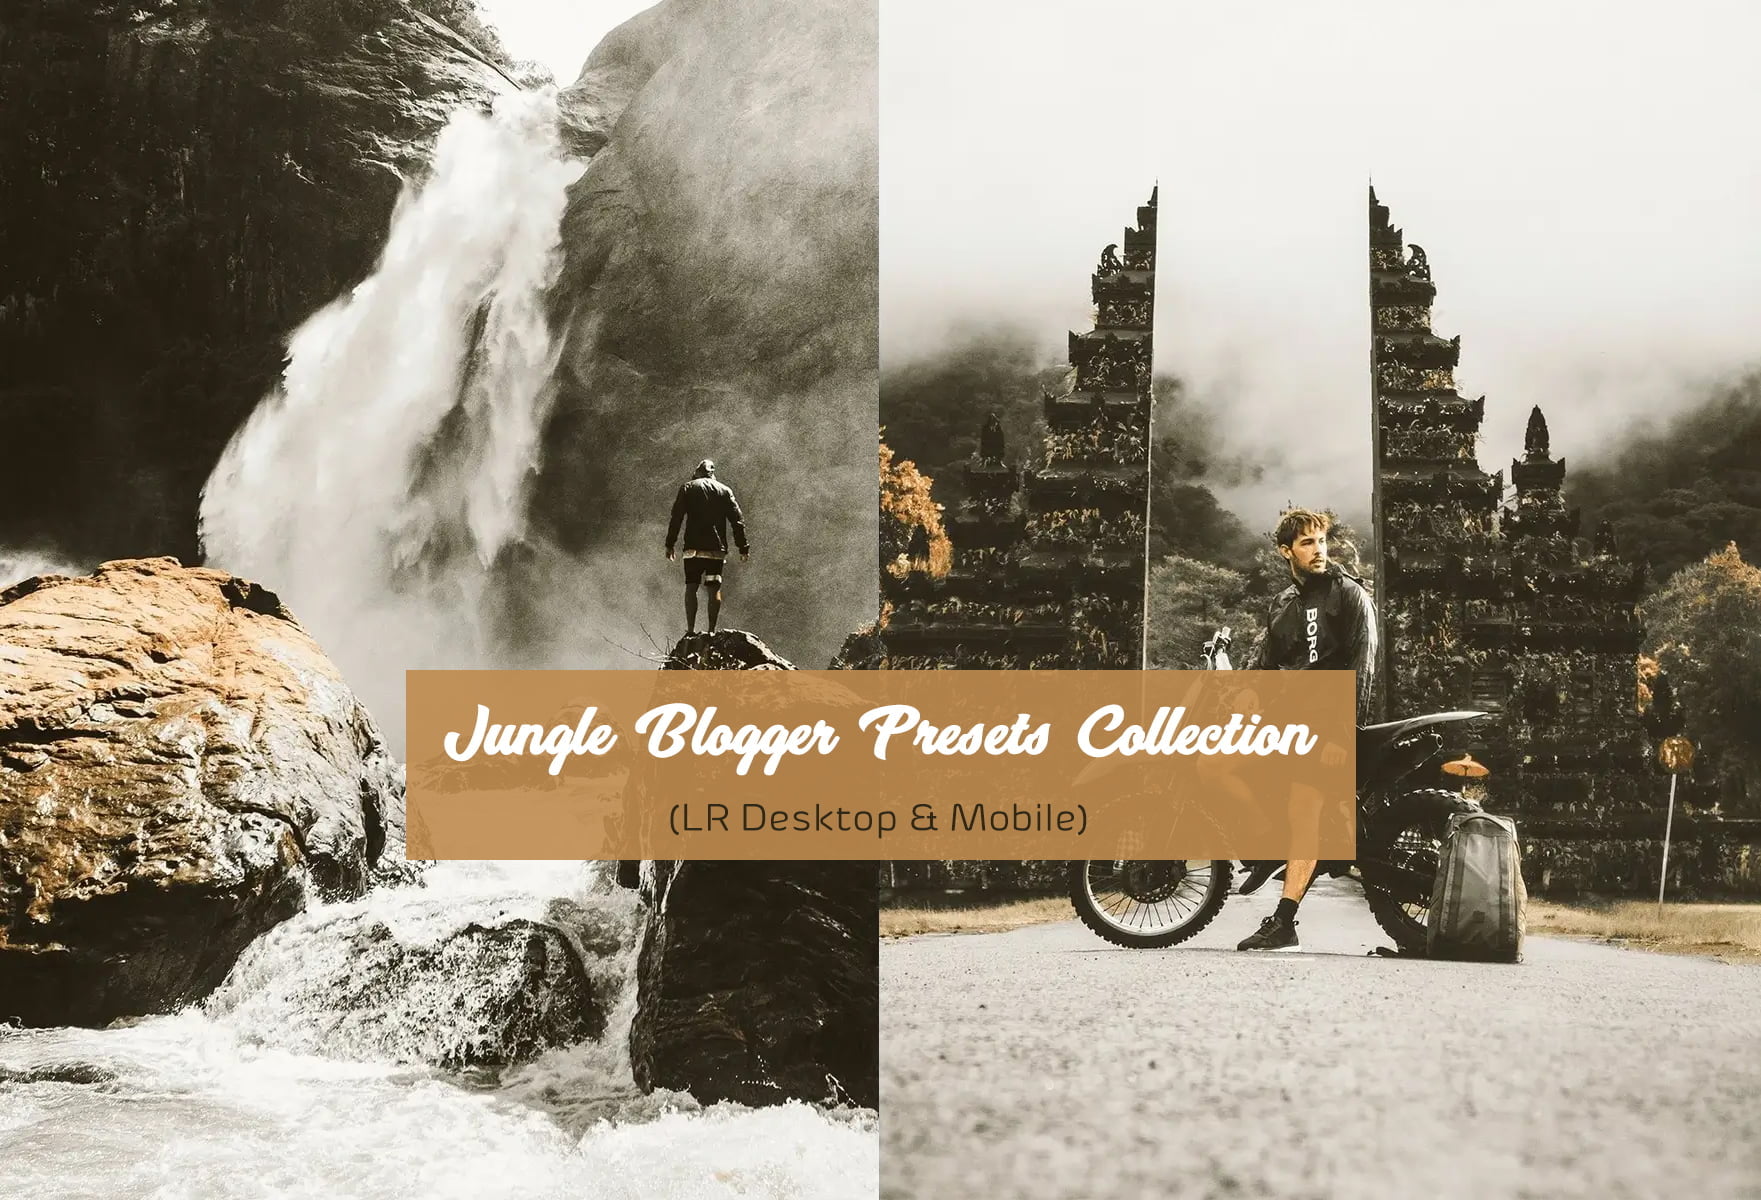 Jungle Blogger Presets Collection